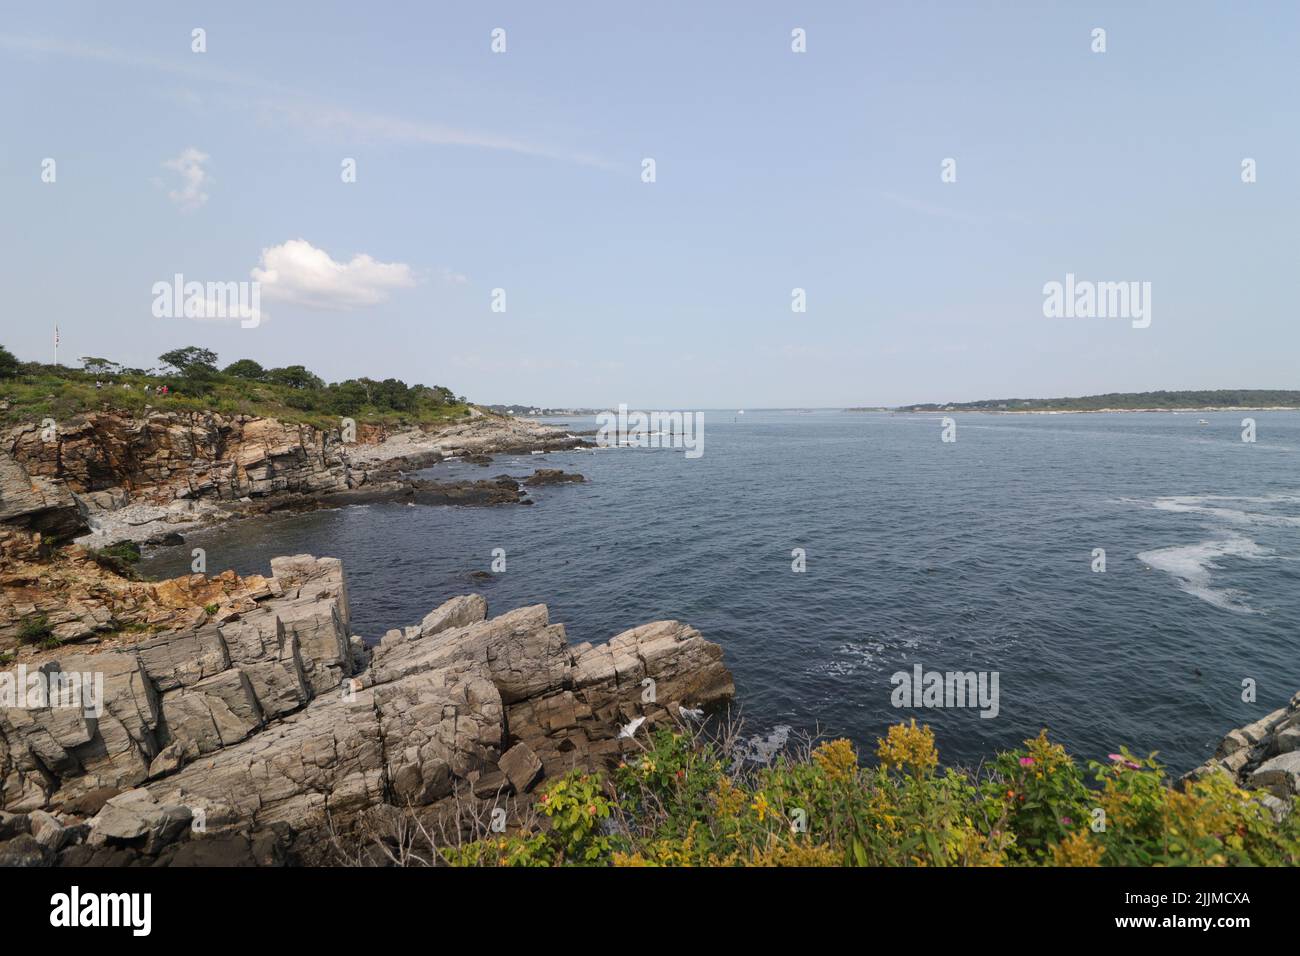 A natural view of a rocky coast under a clear blue sky during summertime Stock Photo